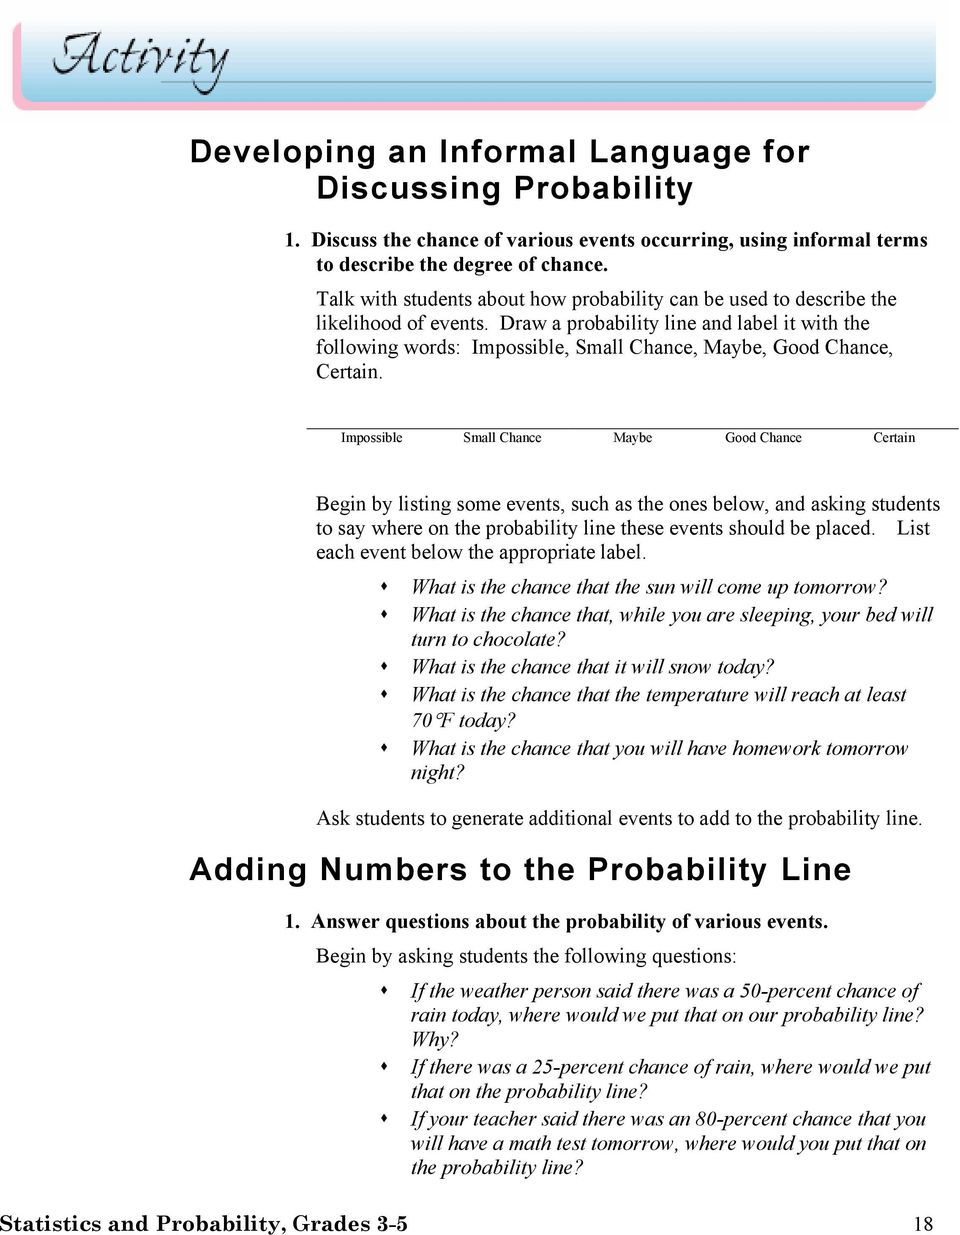 Draw a probability line and label it with the following words: Impossible, Small Chance, Maybe, Good Chance, Certain.